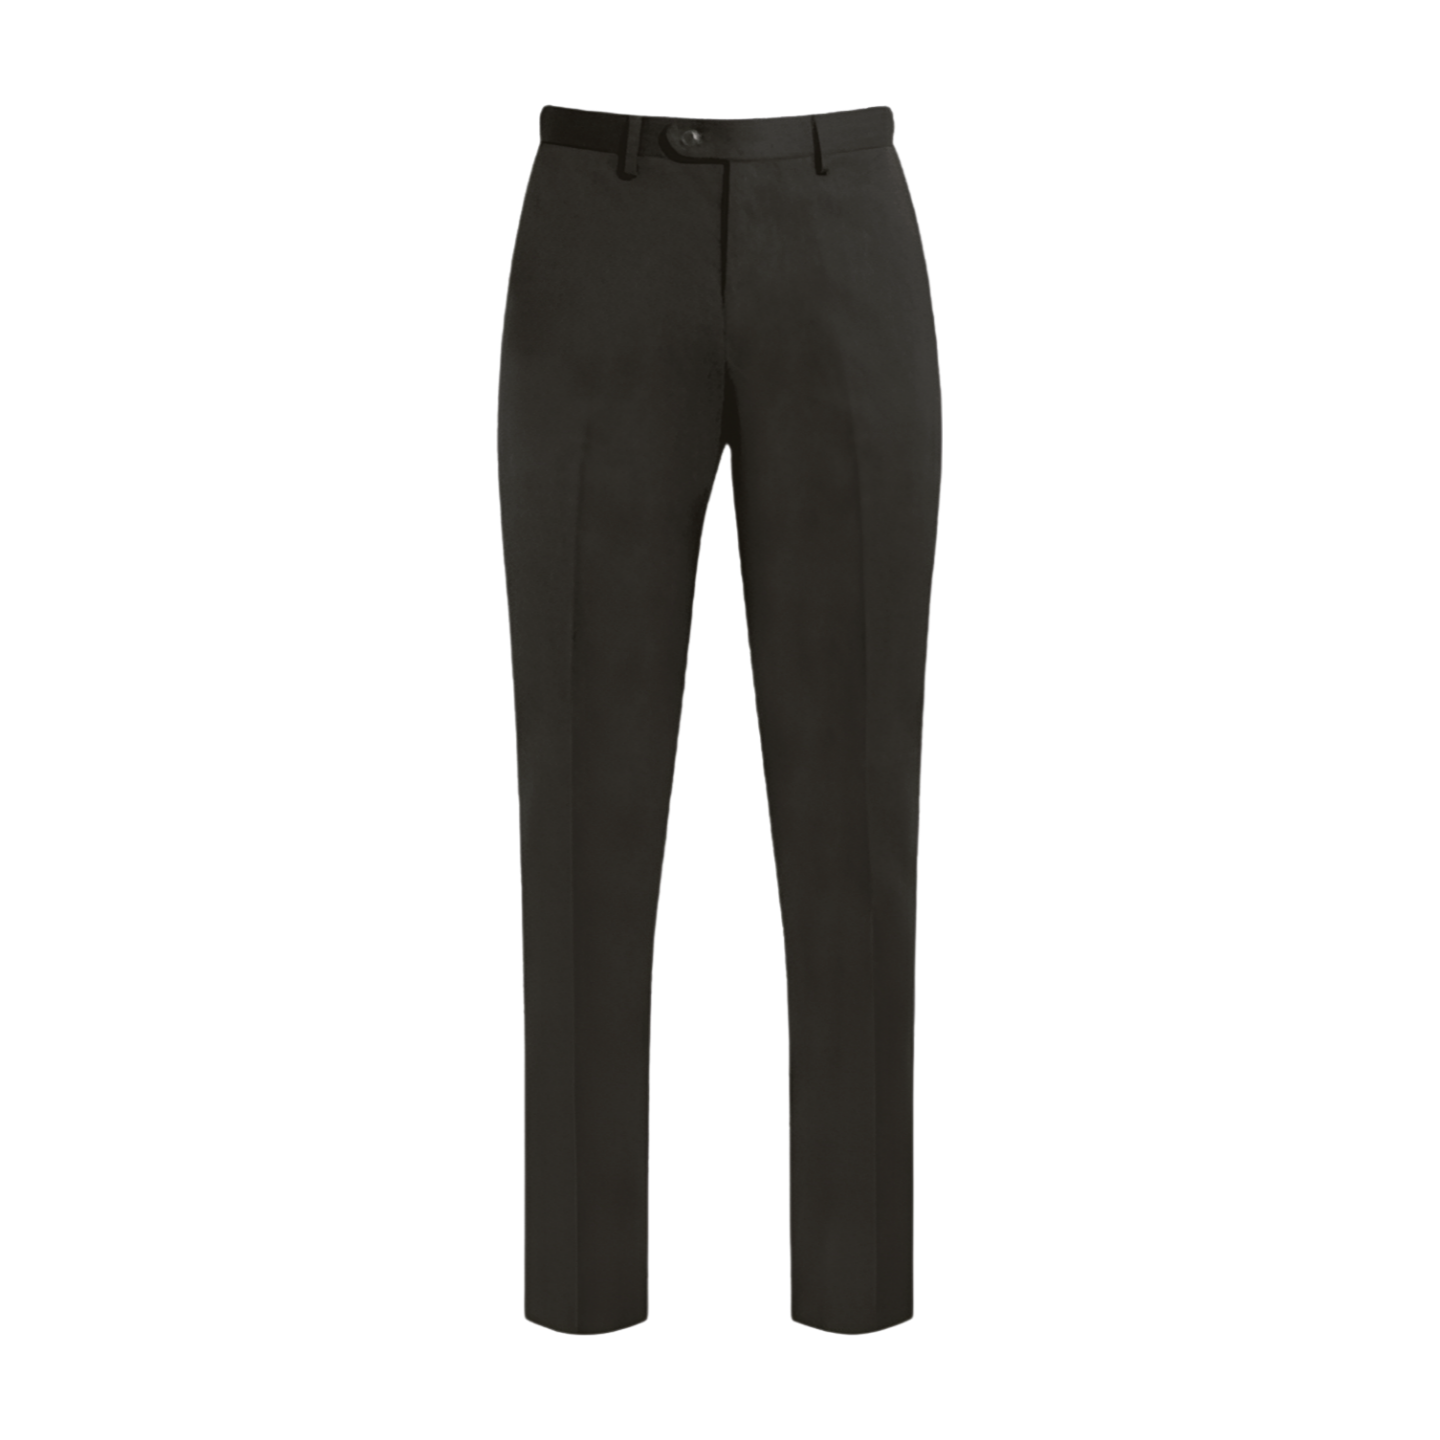 Connah's Quay High Boys Signature Trousers - Queensferry Sports